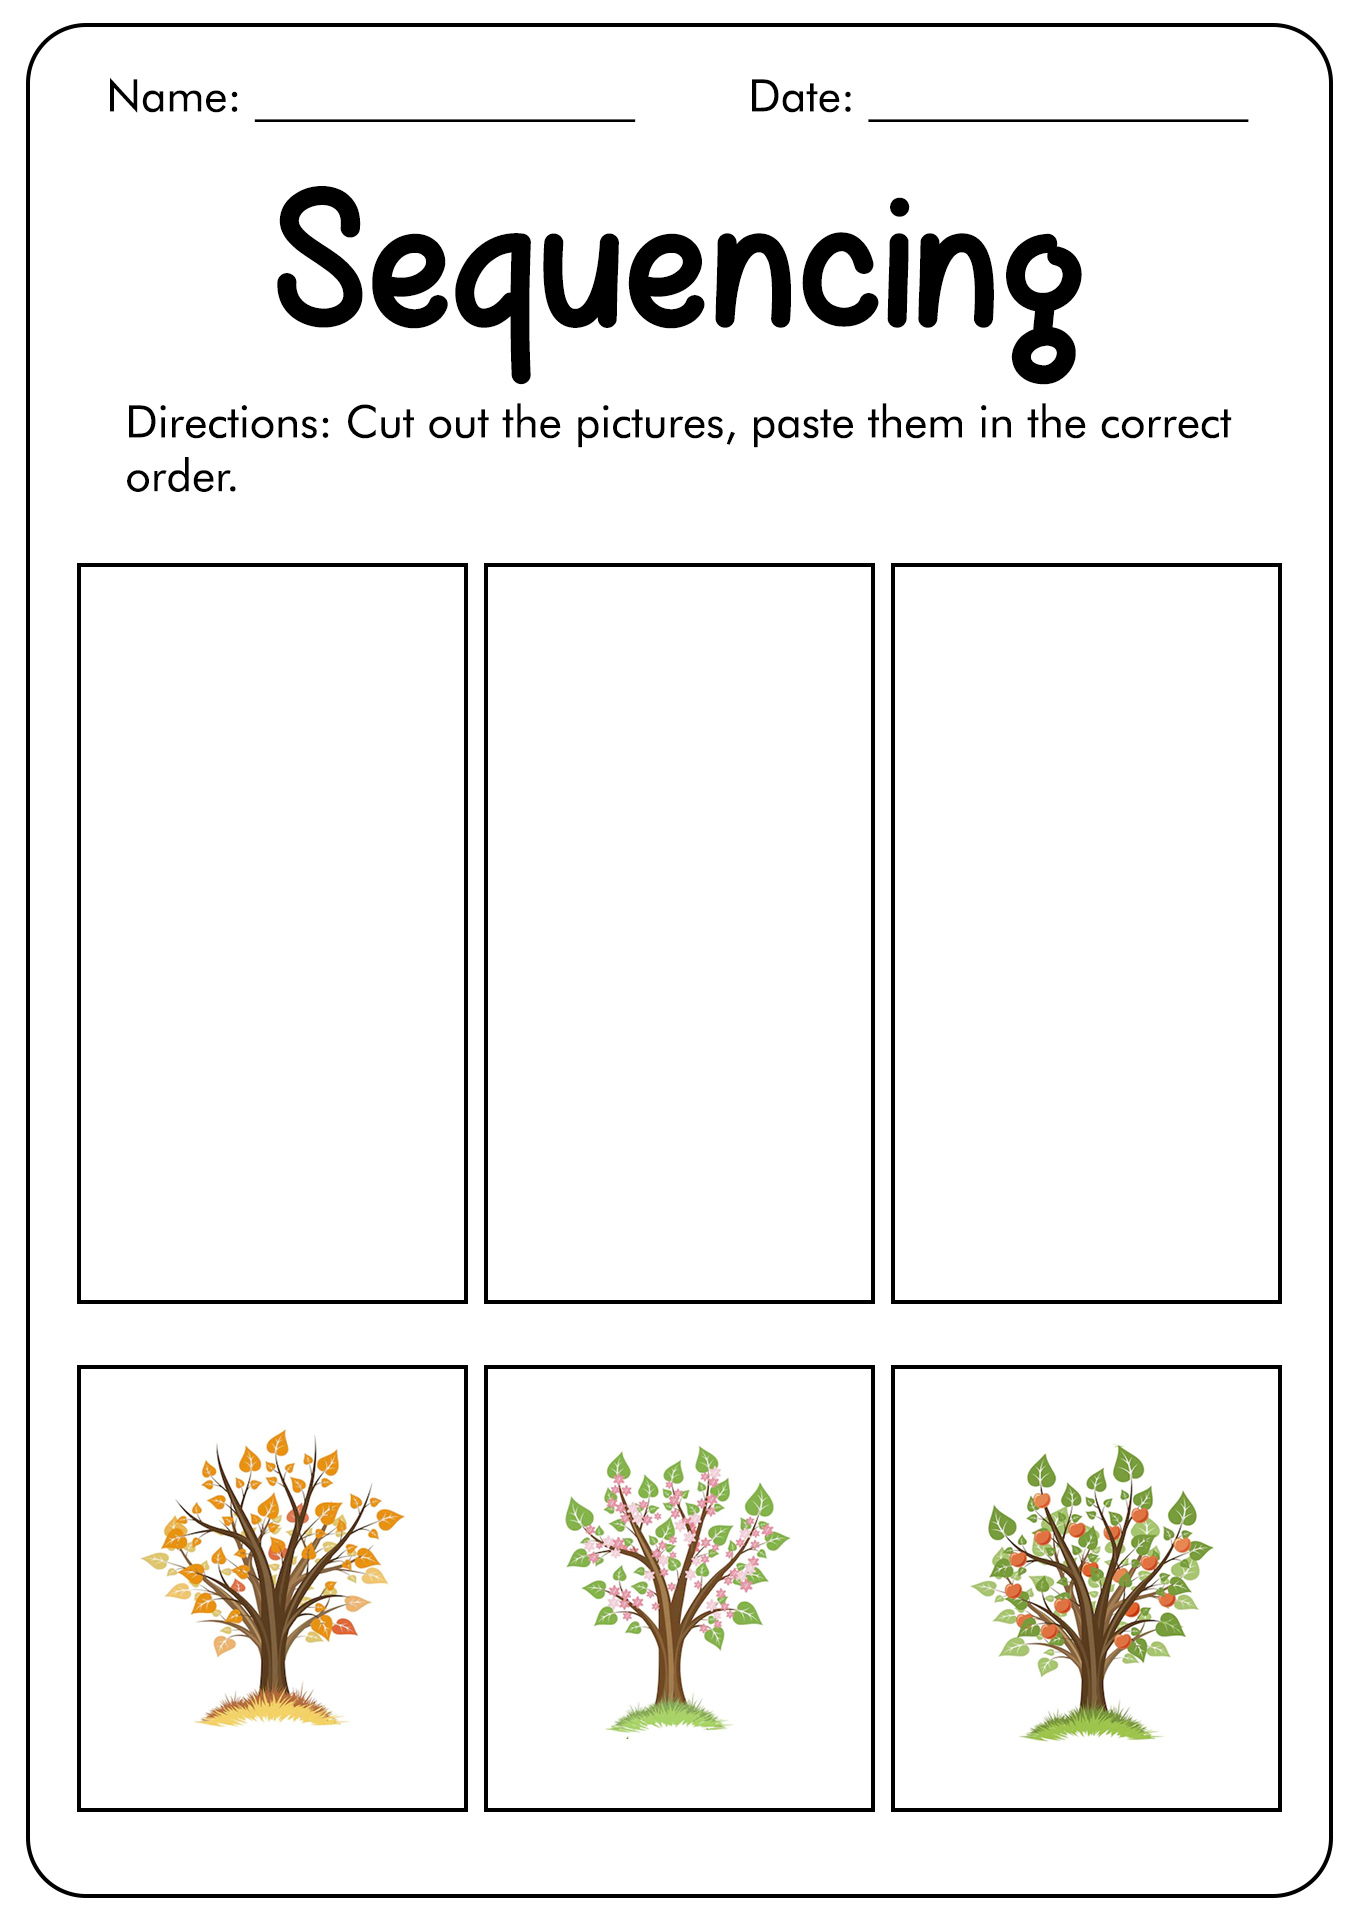 Sequence Worksheets for Kids